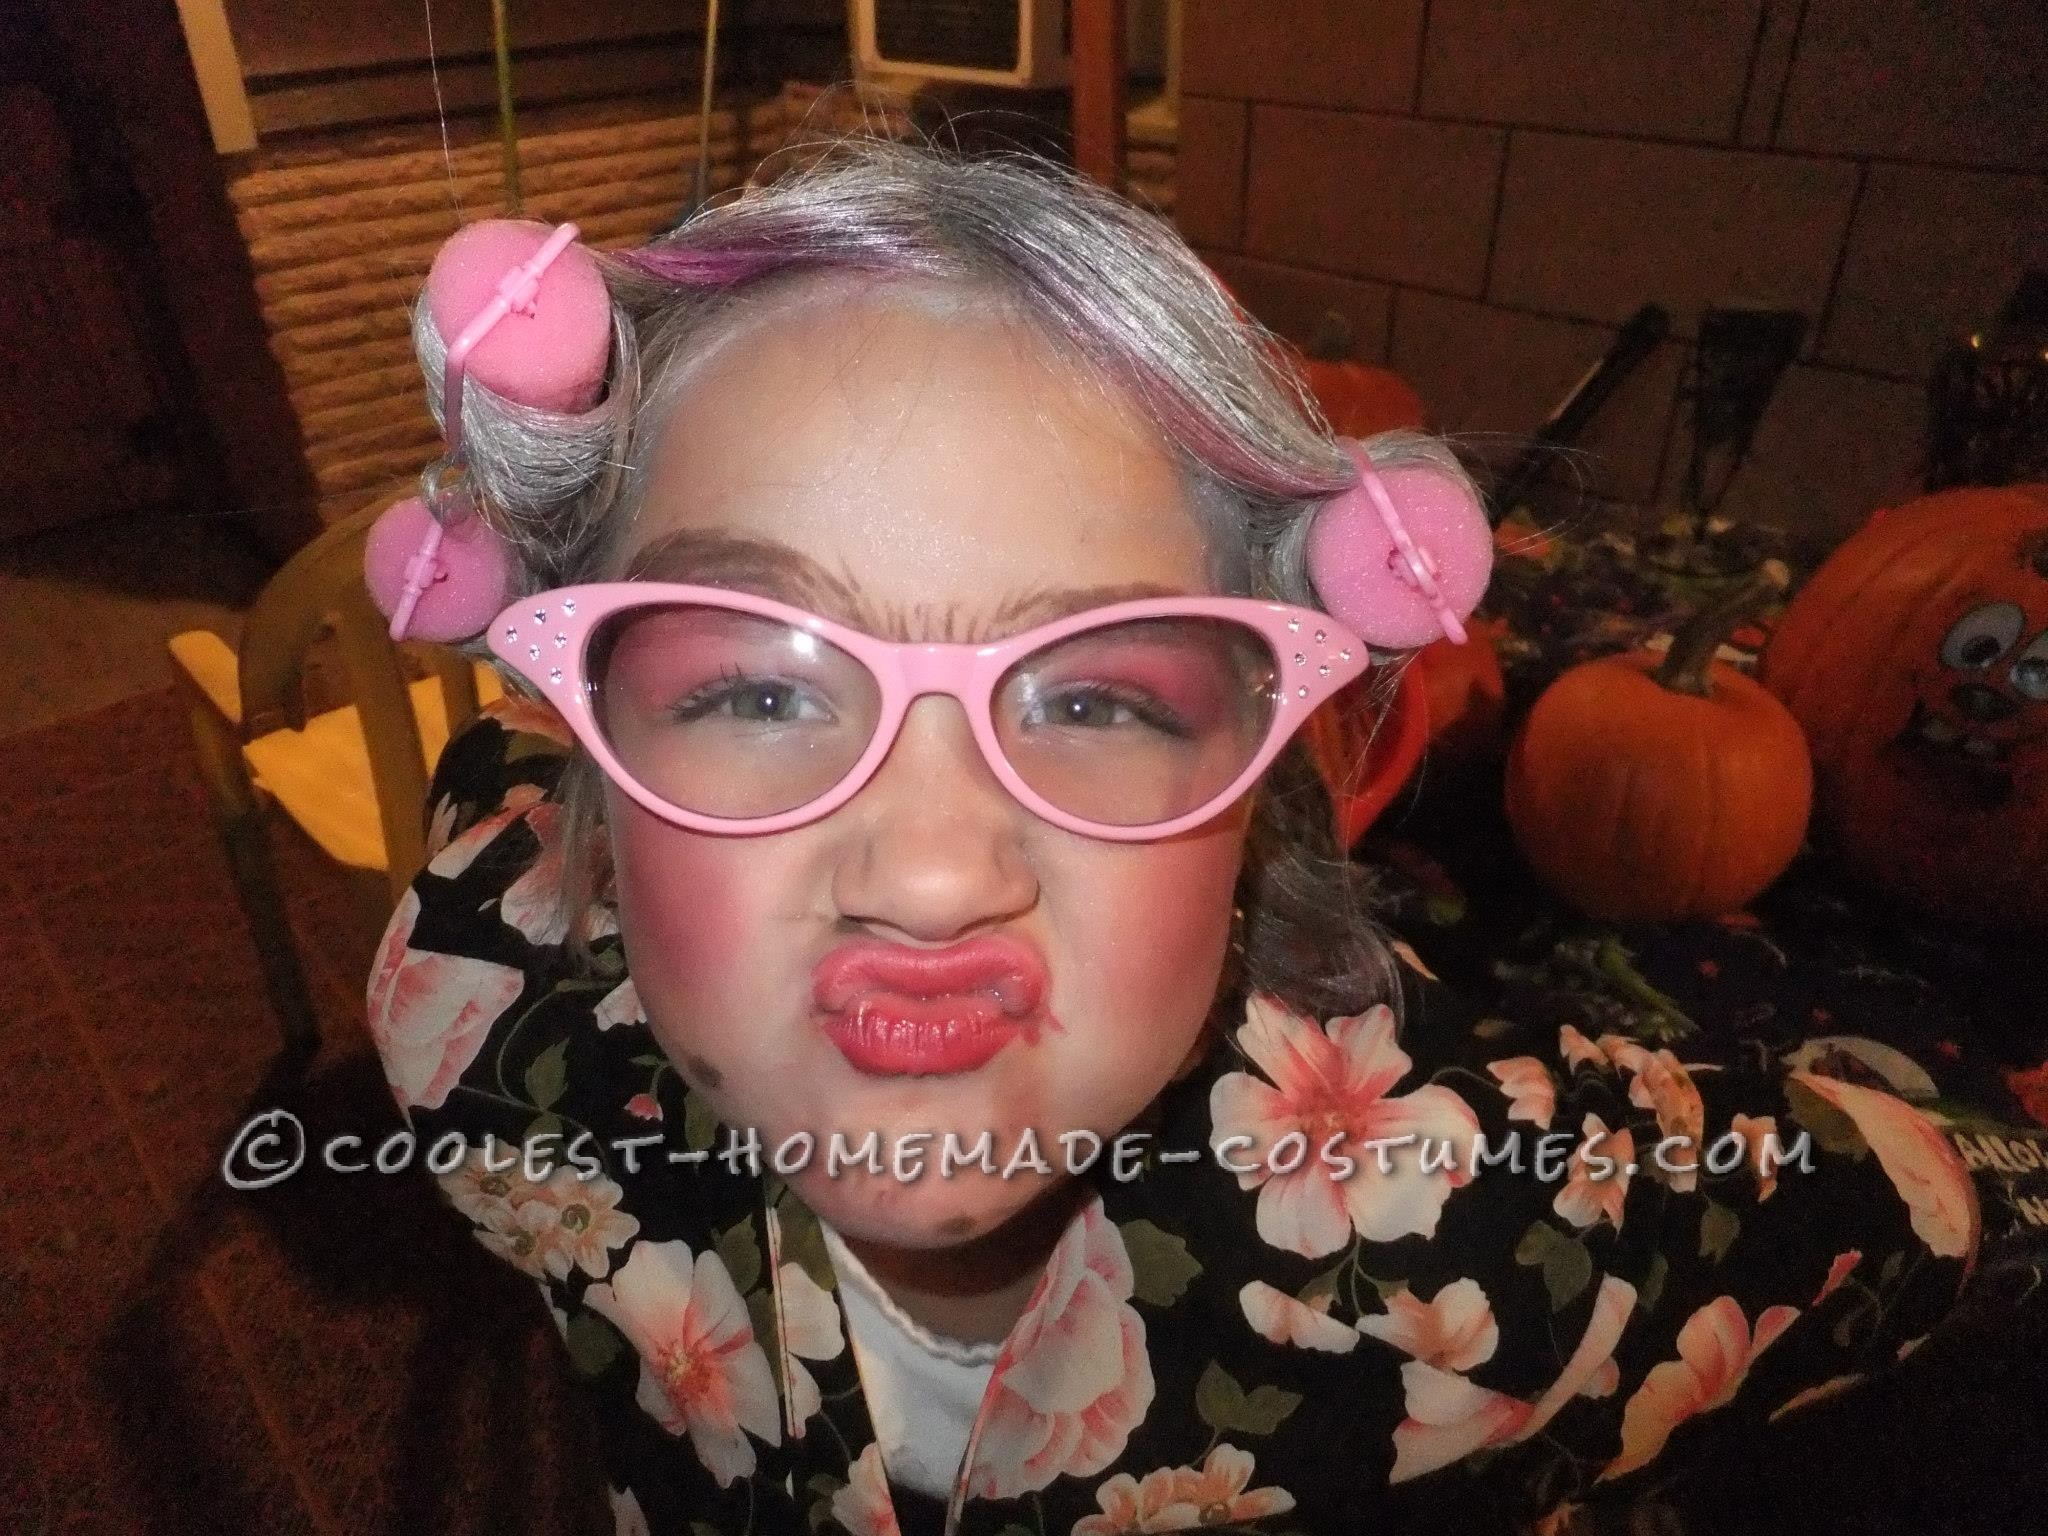 Cool Homemade Costume for a Girl: 8 Year Old in an 80 Year Old Body